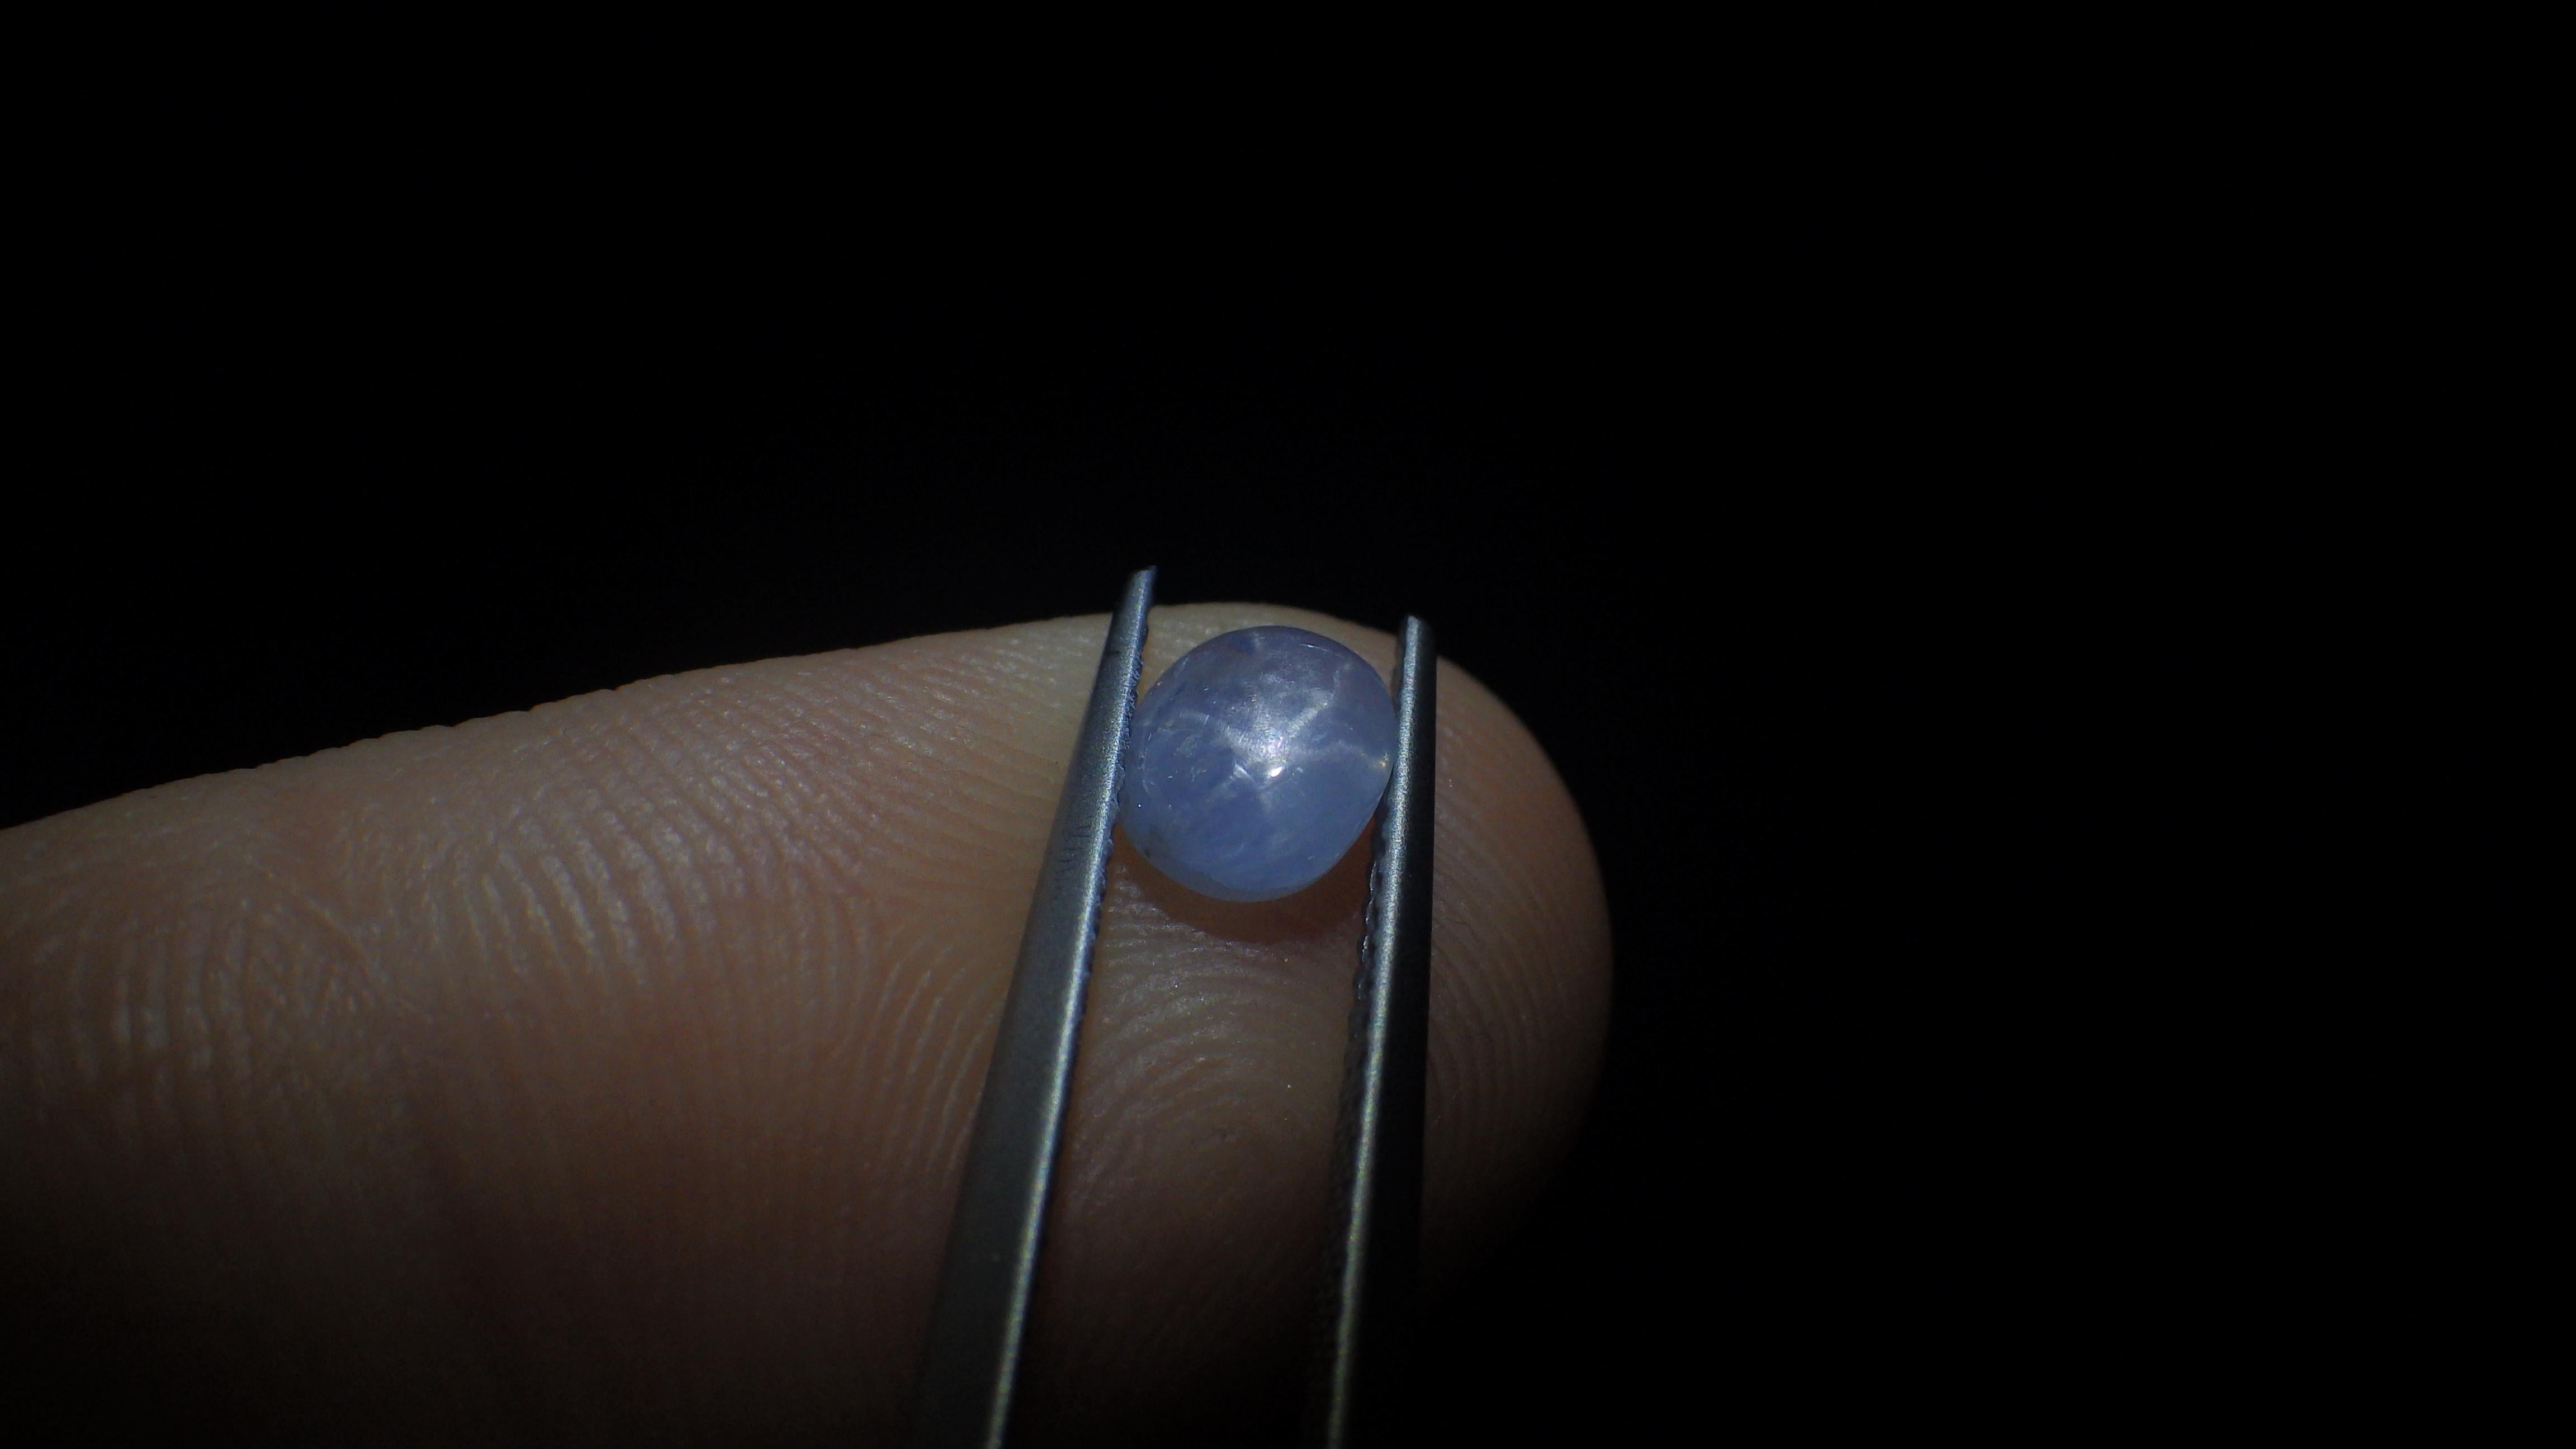 Please note, Star Sapphire is incredibly difficult to photograph, the star looks MUCH better in real life than in the photo.

Stone Details:

Item Description: One Loose Stone
Gem Weight: 1.33 cts.
Clarity Grade: Type 2 Translucent
Color: Very